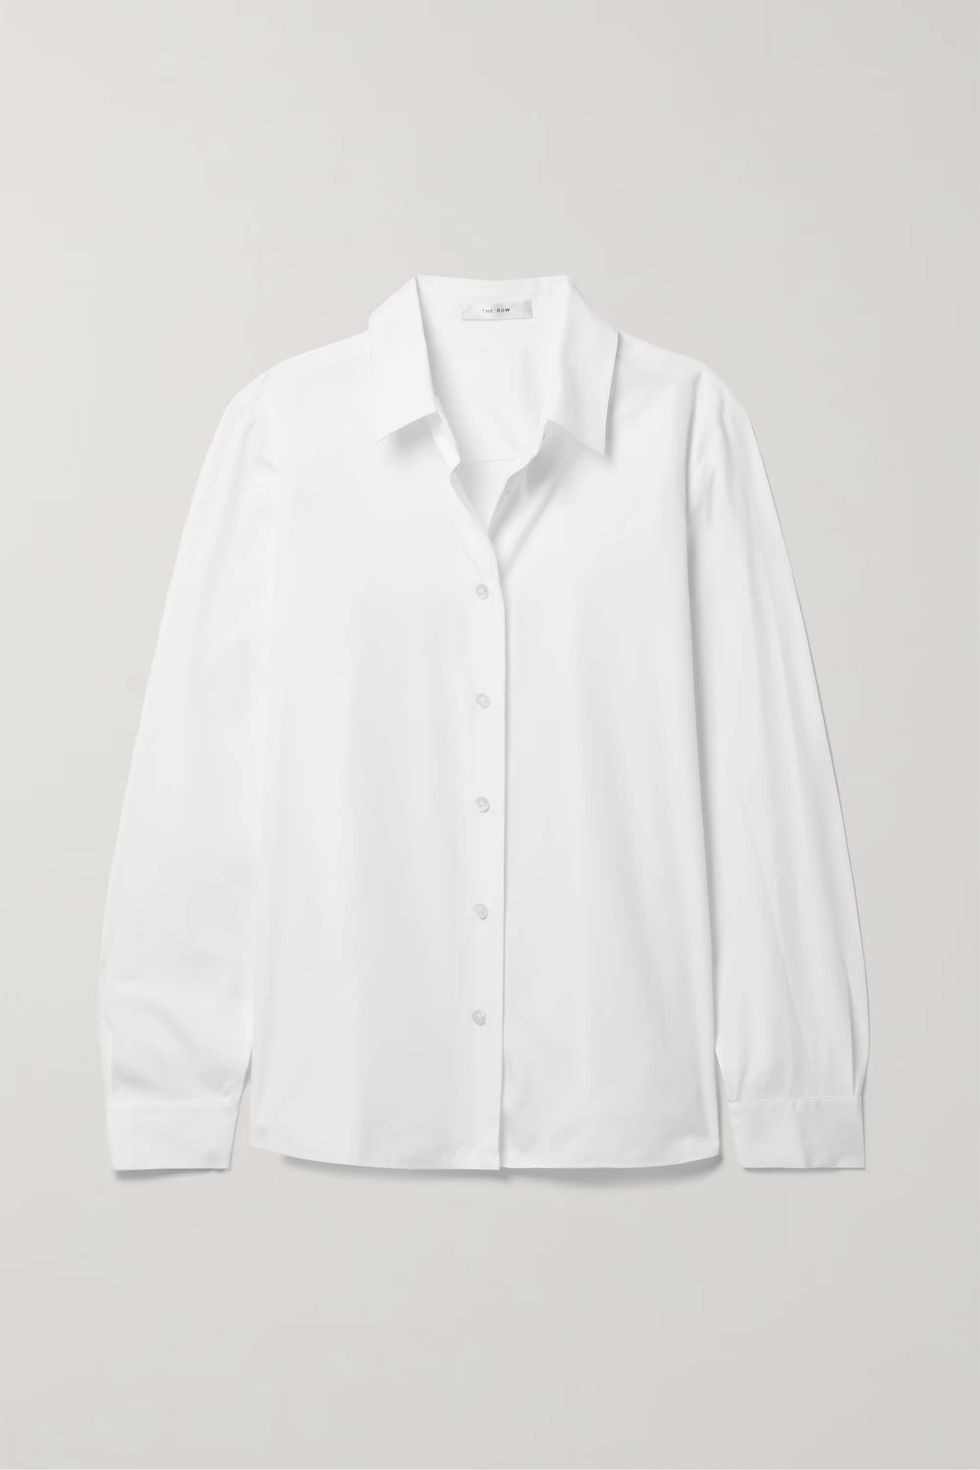 10 white shirts to buy now and wear forever